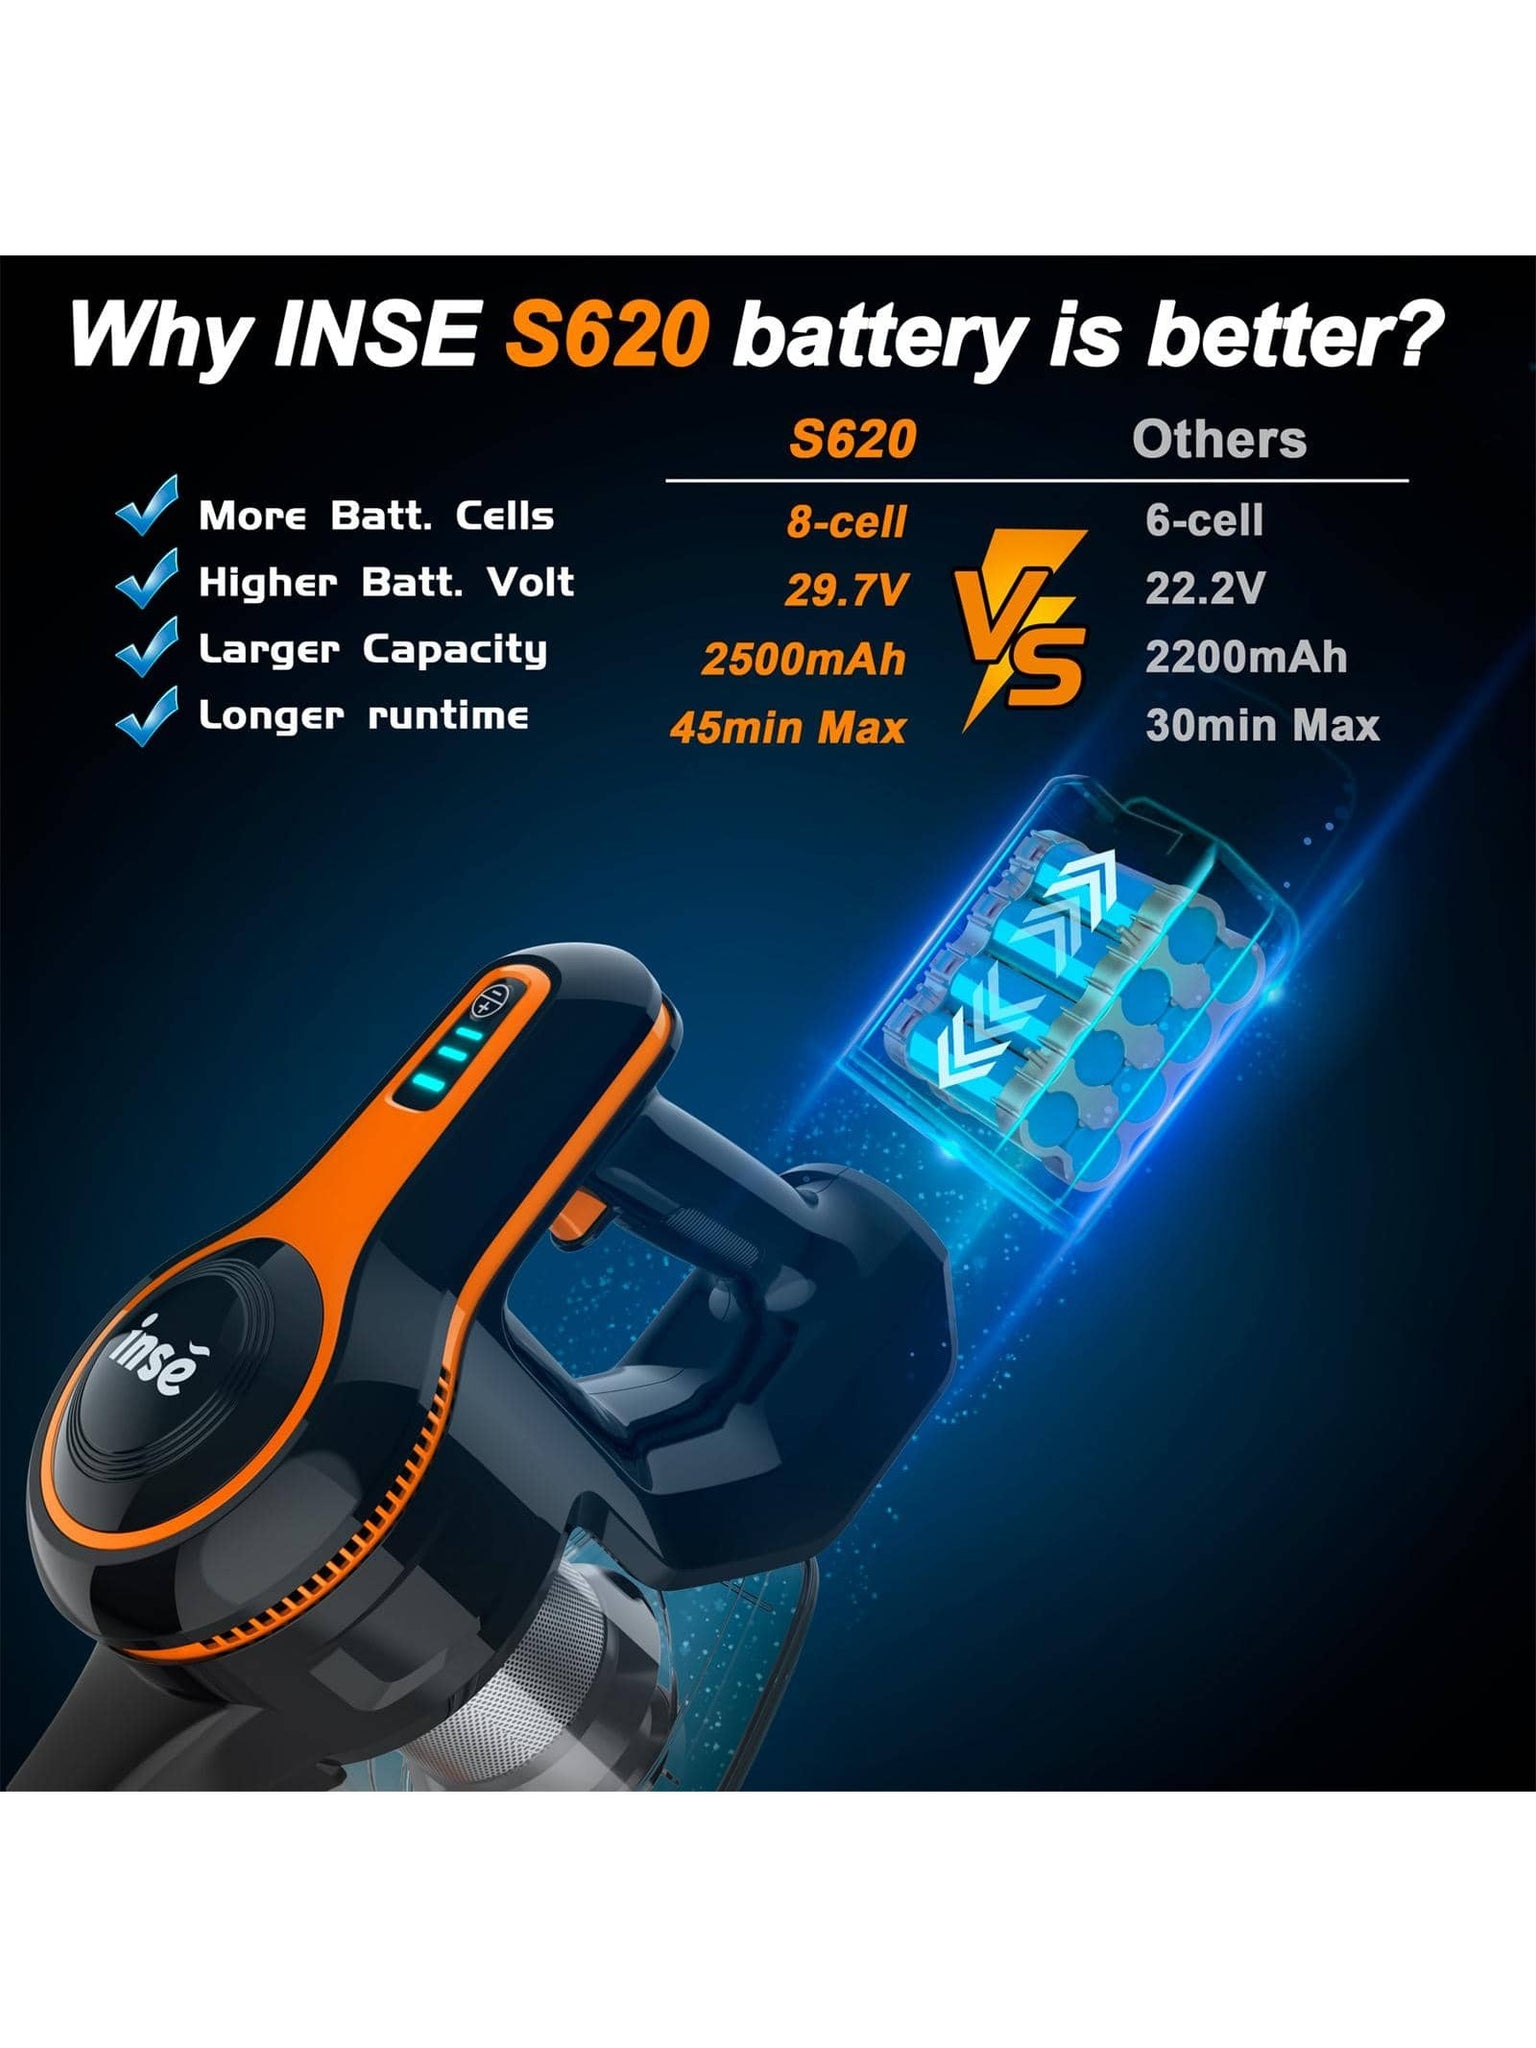 INSE Cordless Vacuum Cleaner, 23Kpa Strong Suction Stick Vacuum up to 45min Runtime Detachable Battery, Ultra Quiet Lightweight for Pet Hair Carpet Hard Floor